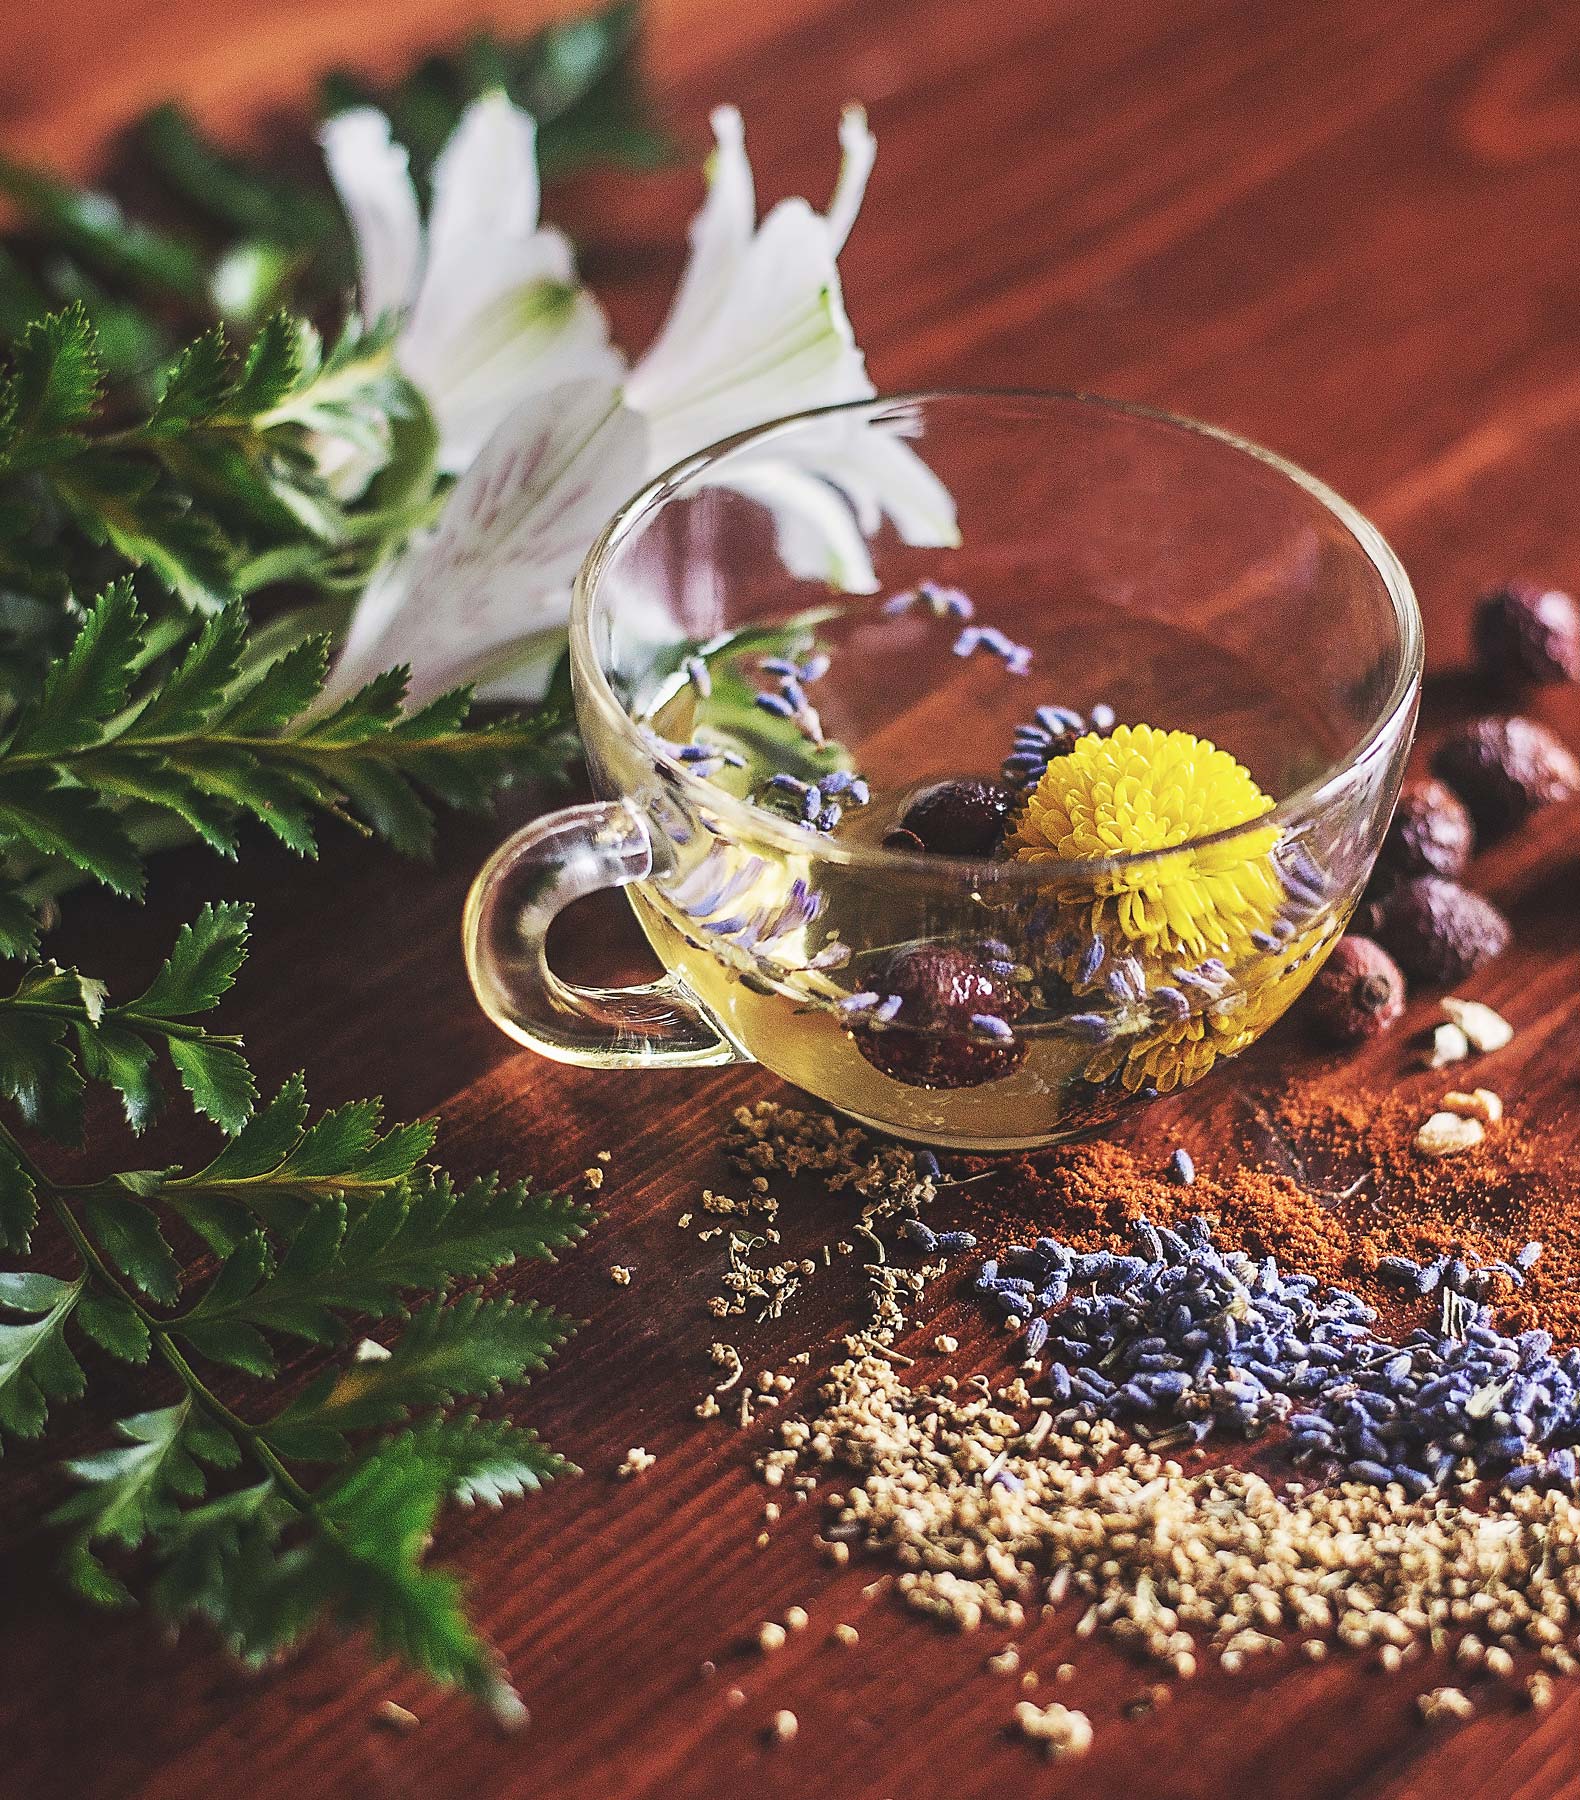 Herbal Teas - Is There Anything Healthier